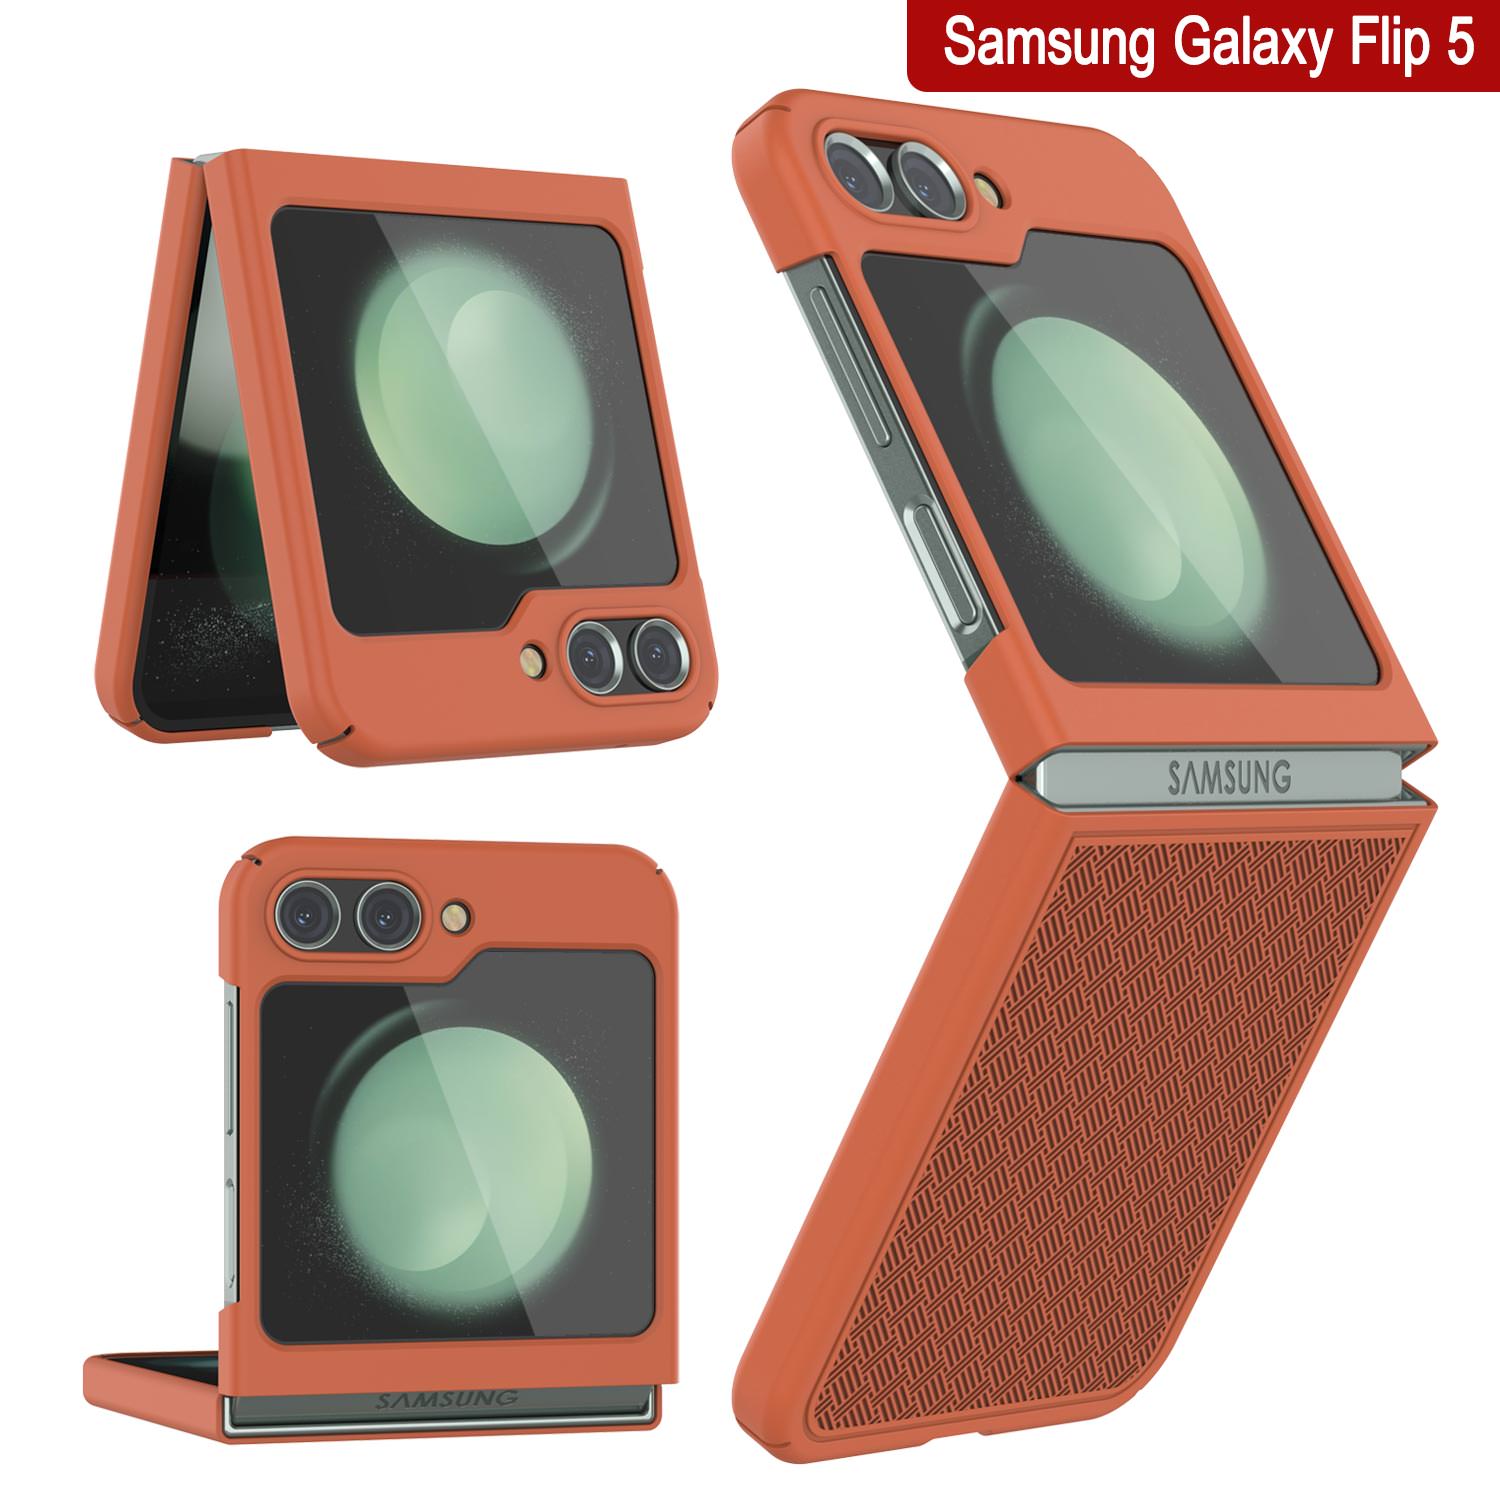 Galaxy Z Flip5 Case With Tempered Glass Screen Protector, Holster Belt Clip & Built-In Kickstand [Orange]